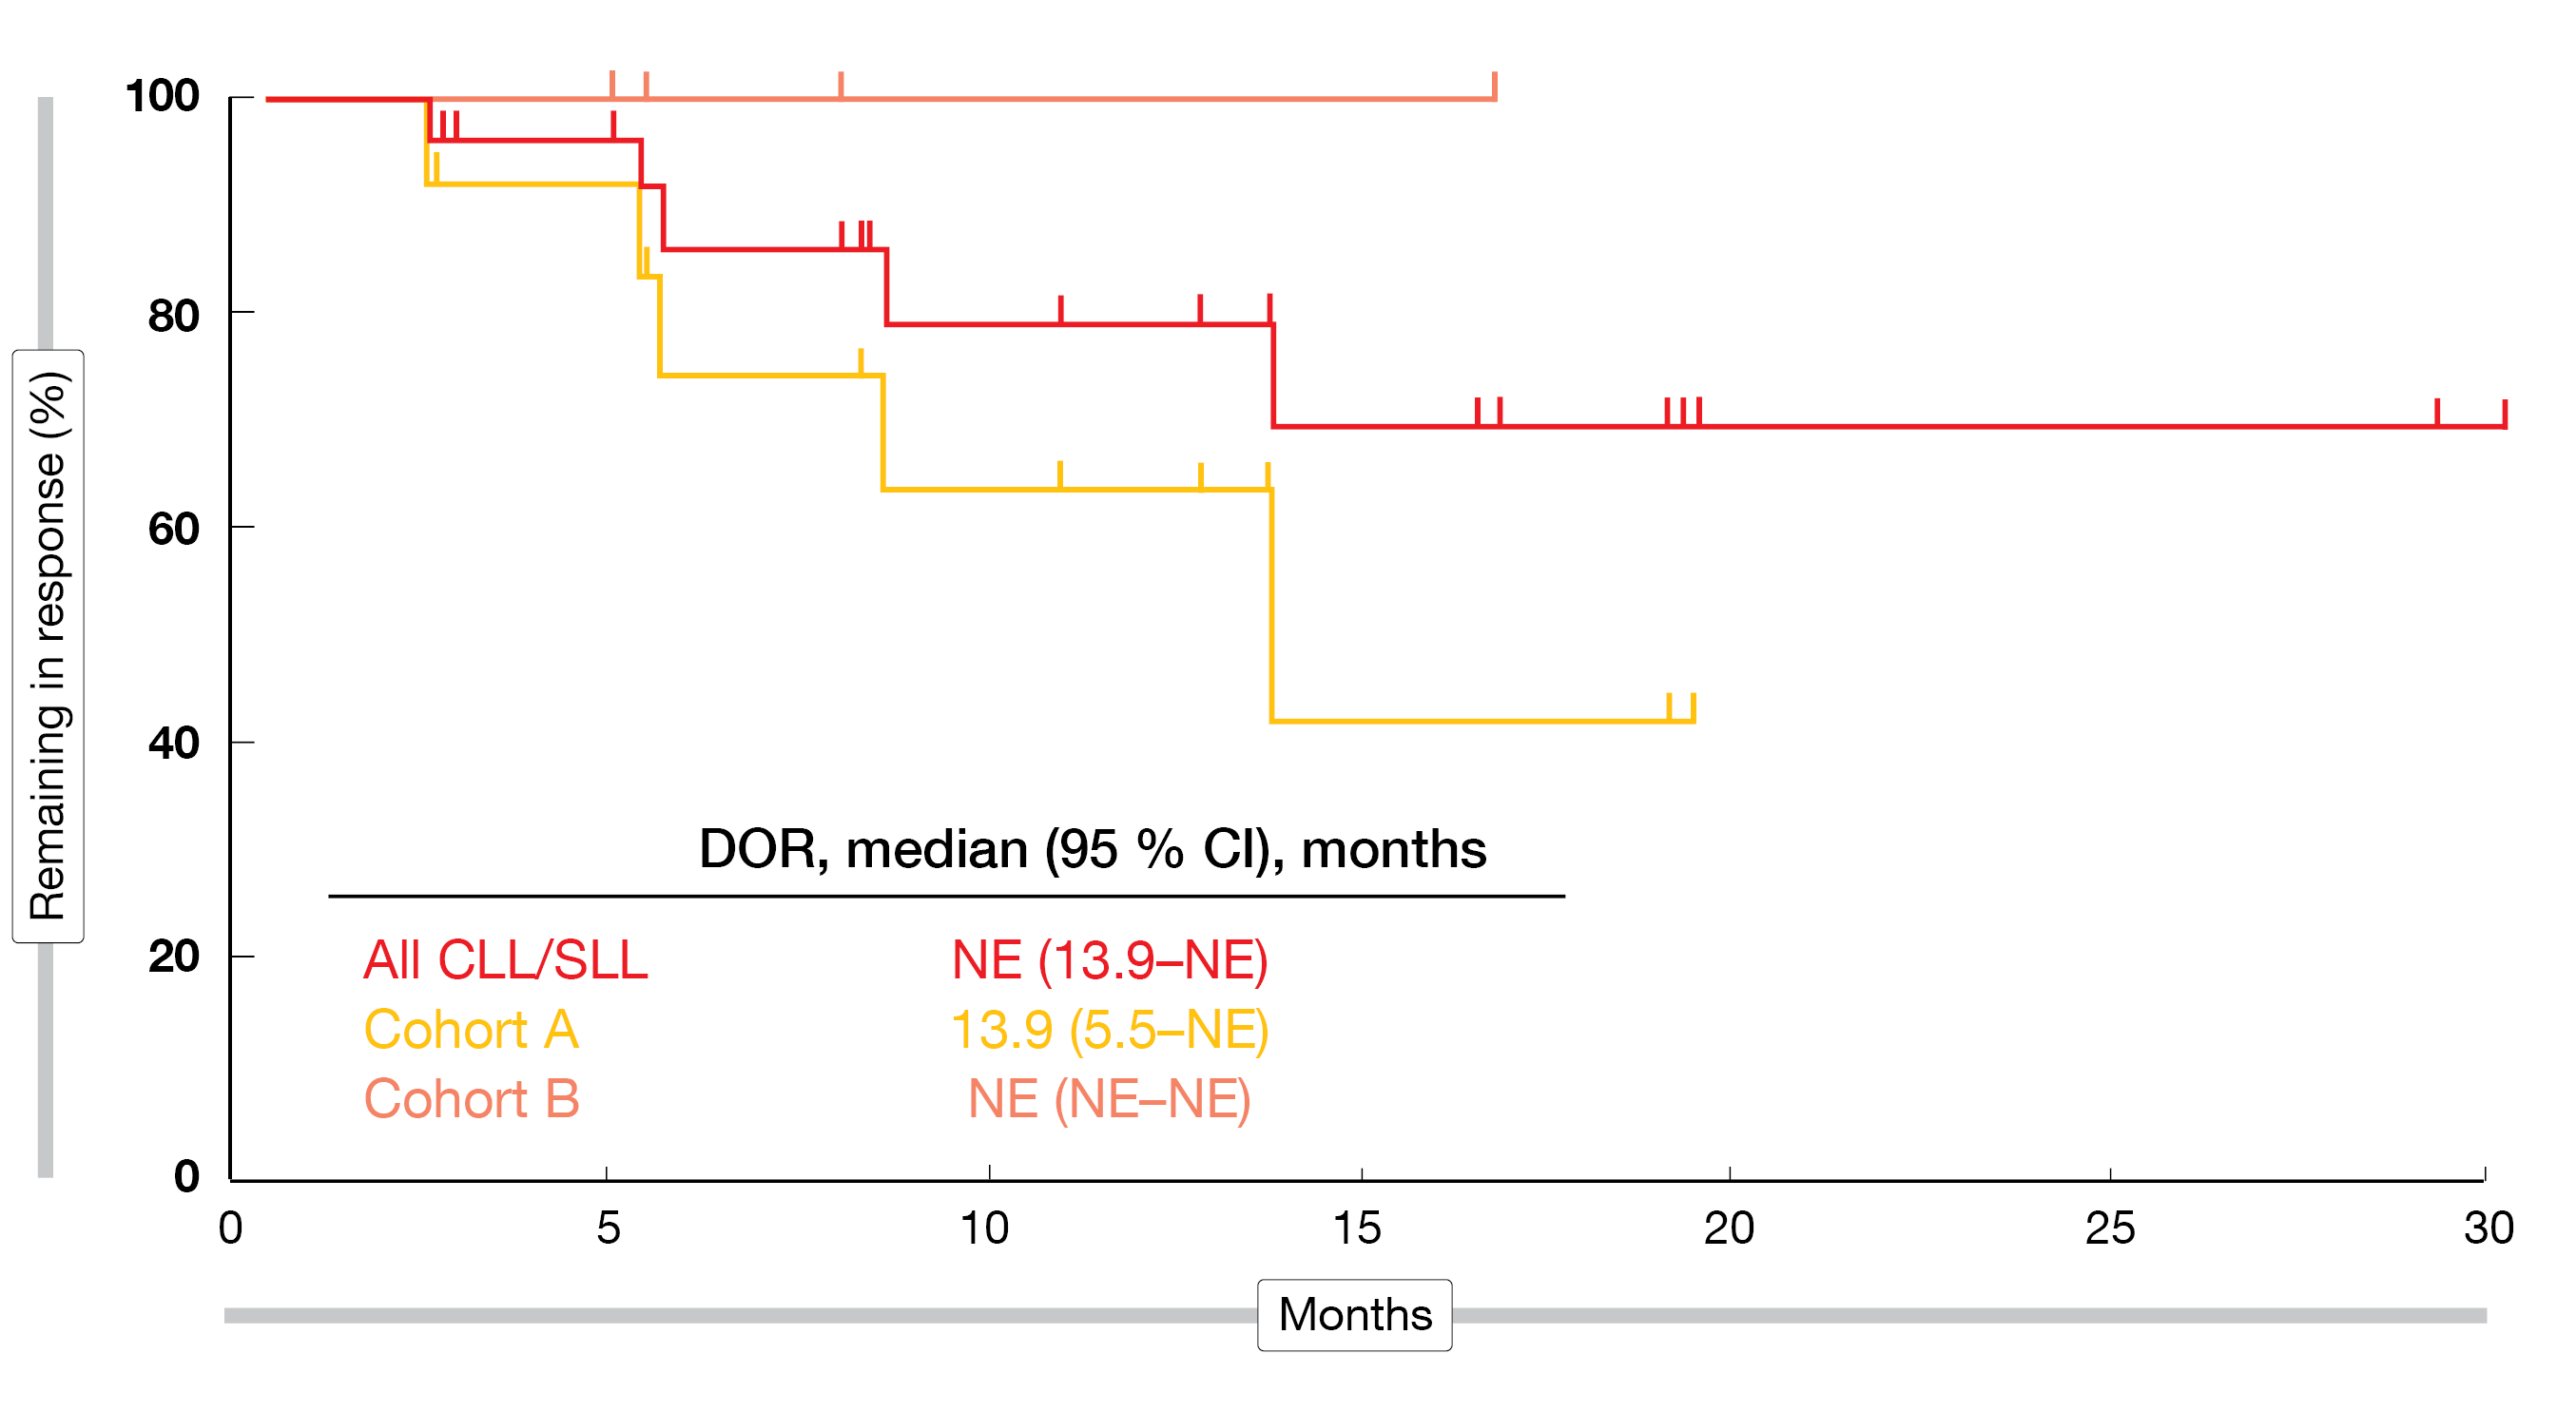 Figure 2: BELLWAVE-001 study: duration of response on nemtabrutinib treatment in all patients and in Cohorts A and B